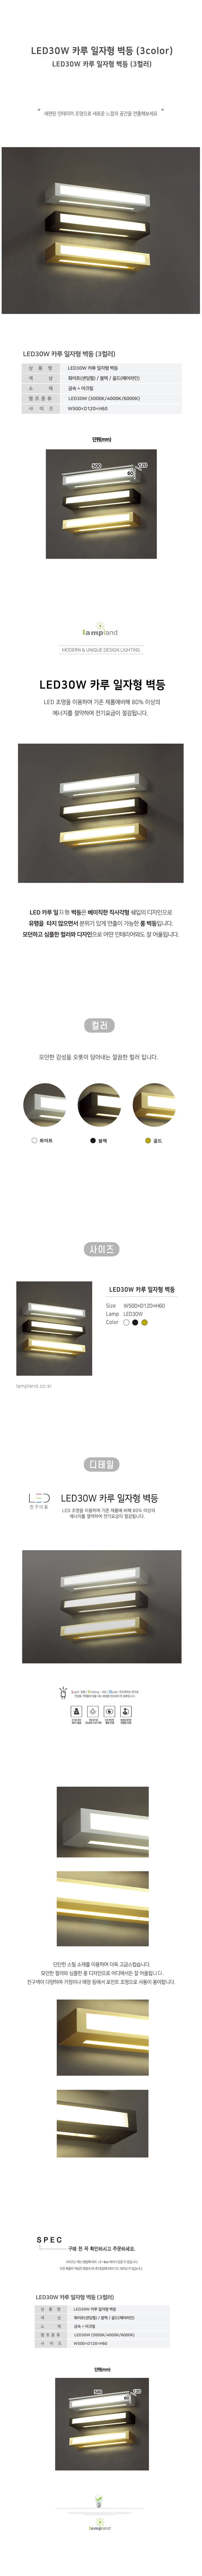 [LED30W] 카루 일자형 벽등(3color)